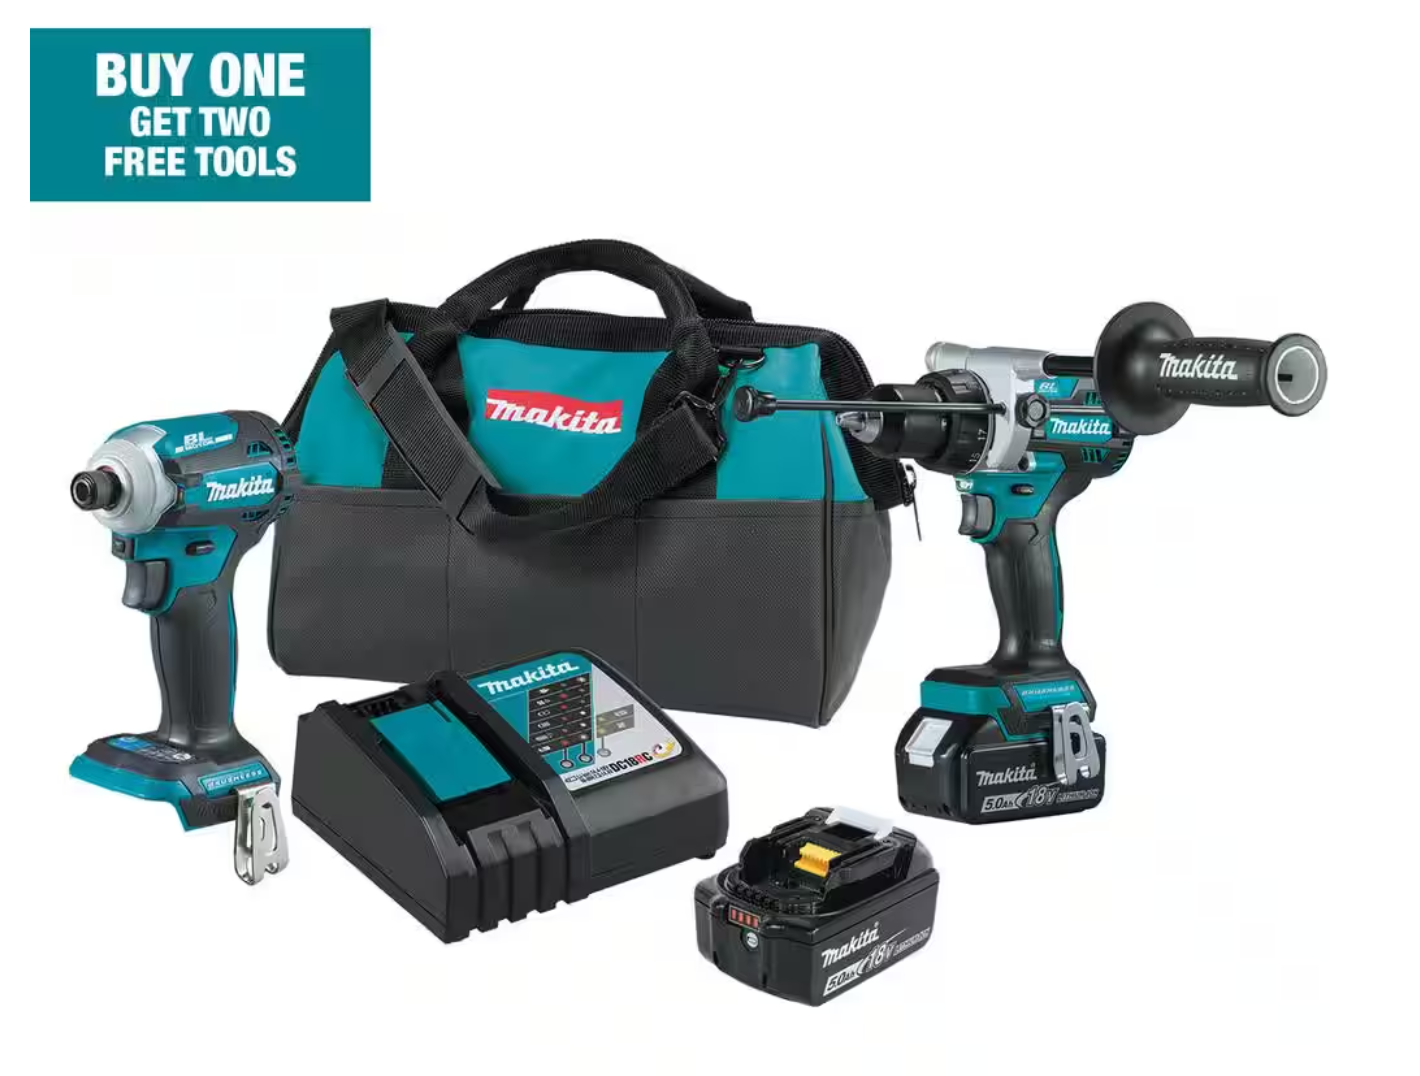 Makita 18V LXT 1/2" Impact Driver and Hammer Drill-Driver Kit, Batteries, Charger + Free Tools for $399